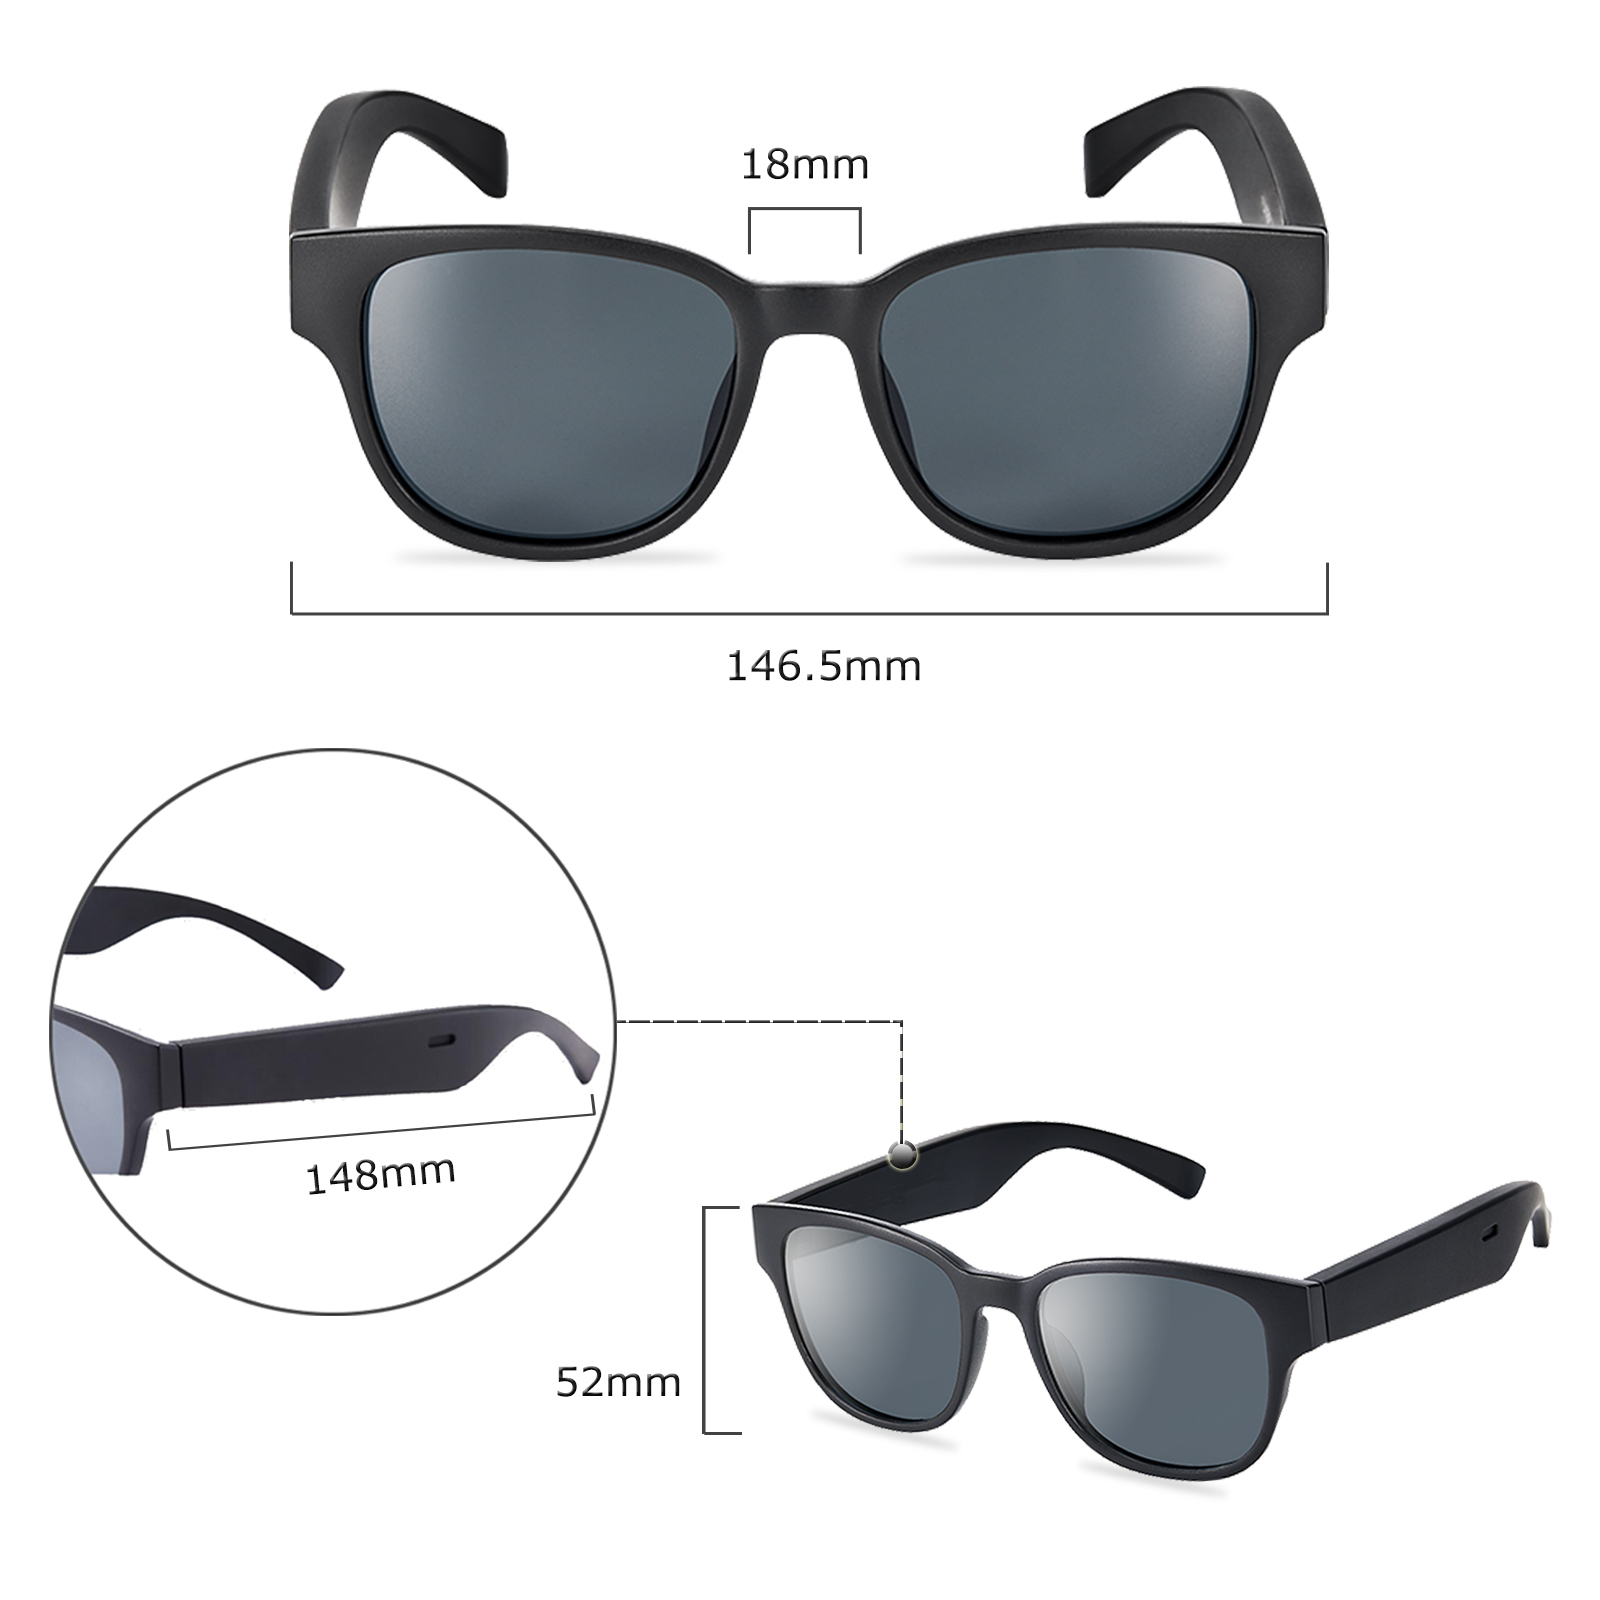 Smart Glasses/Audio Sunglasses, Voice Control and Open Ear Style Listen to music and calls with volume up and down, 6-hour battery life, Bluetooth 5.0 smart glasses and - image 7 of 7